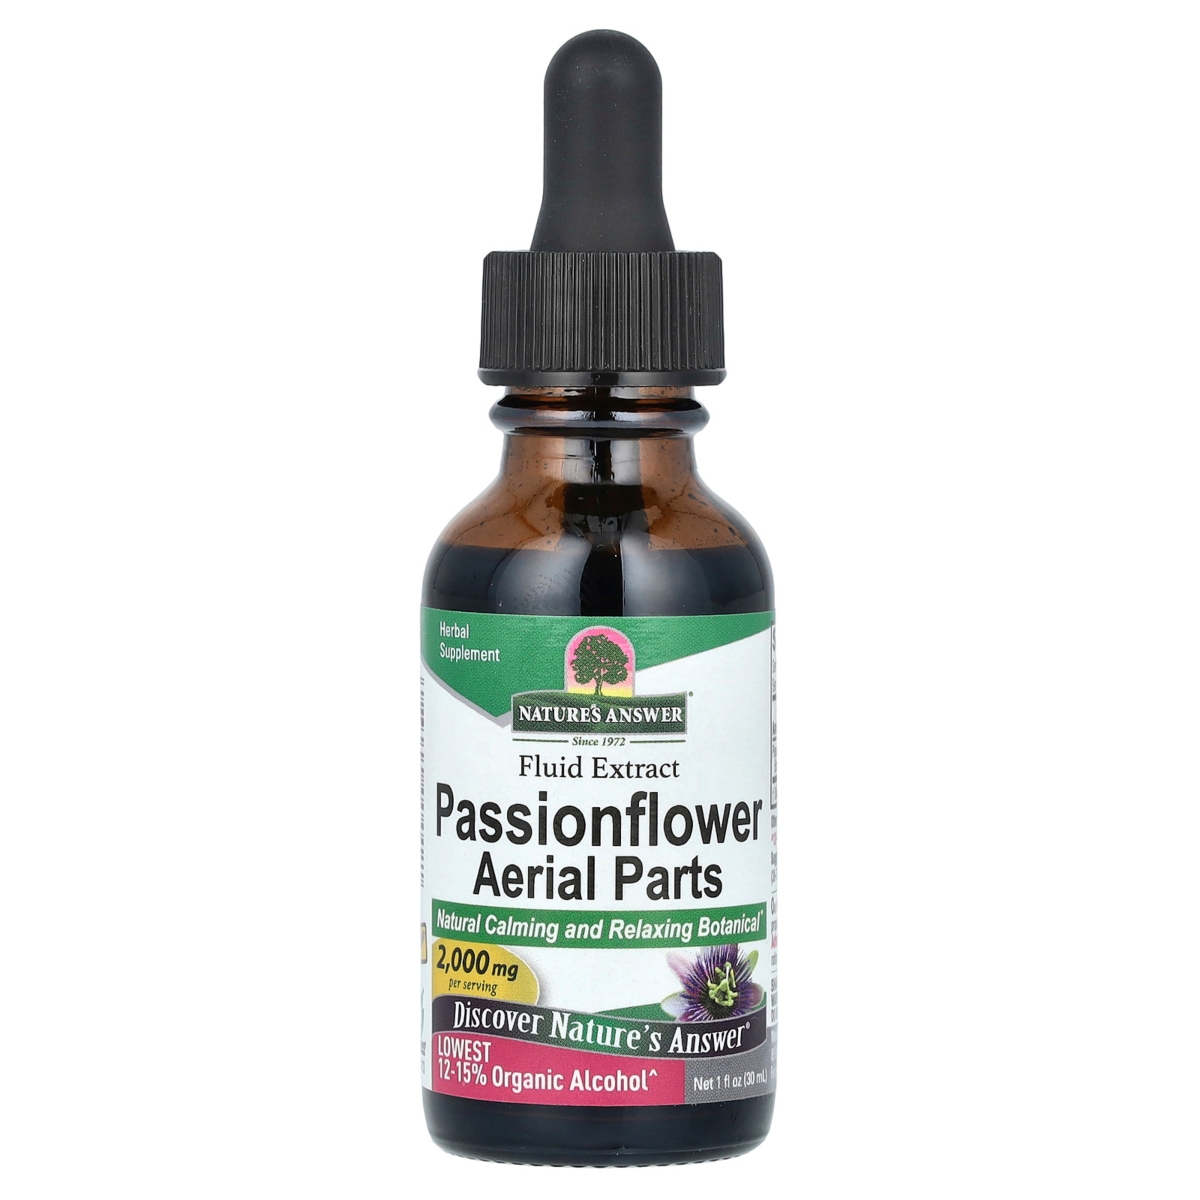 Passionflower Aerial Parts Fluid Extract 2 000 mg - 1 fl oz (30 ml) - Assorted Pre-Pack